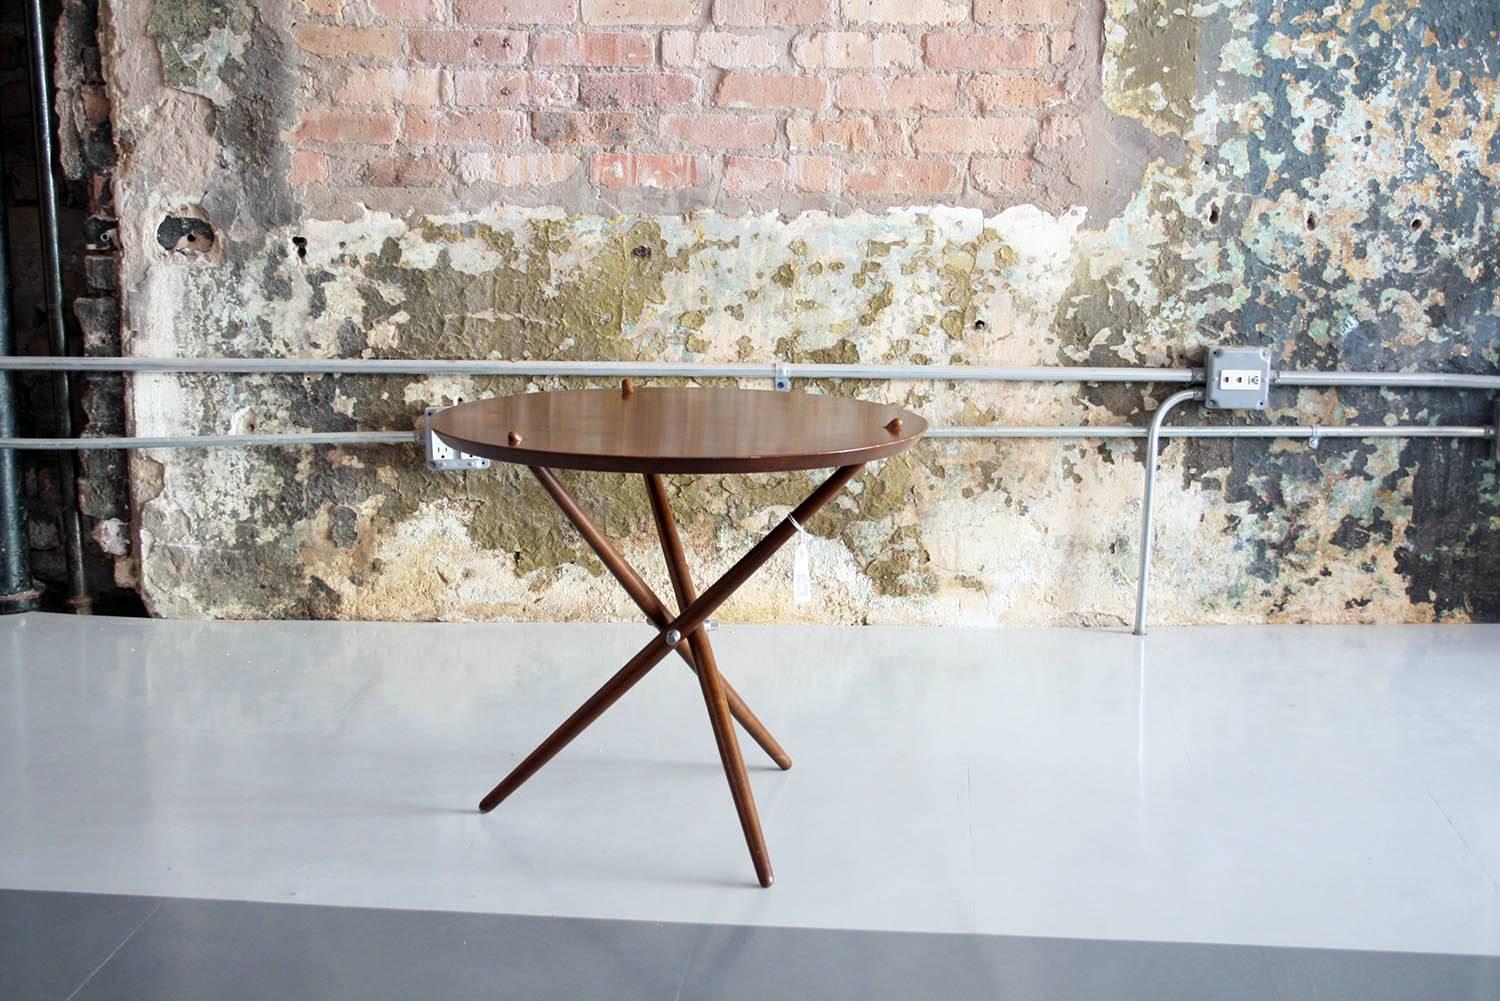 Mid-Century Modern 1948 Hans Bellman Swiss Modernist Tripod Table for Wohnbedarf Imported by Knoll